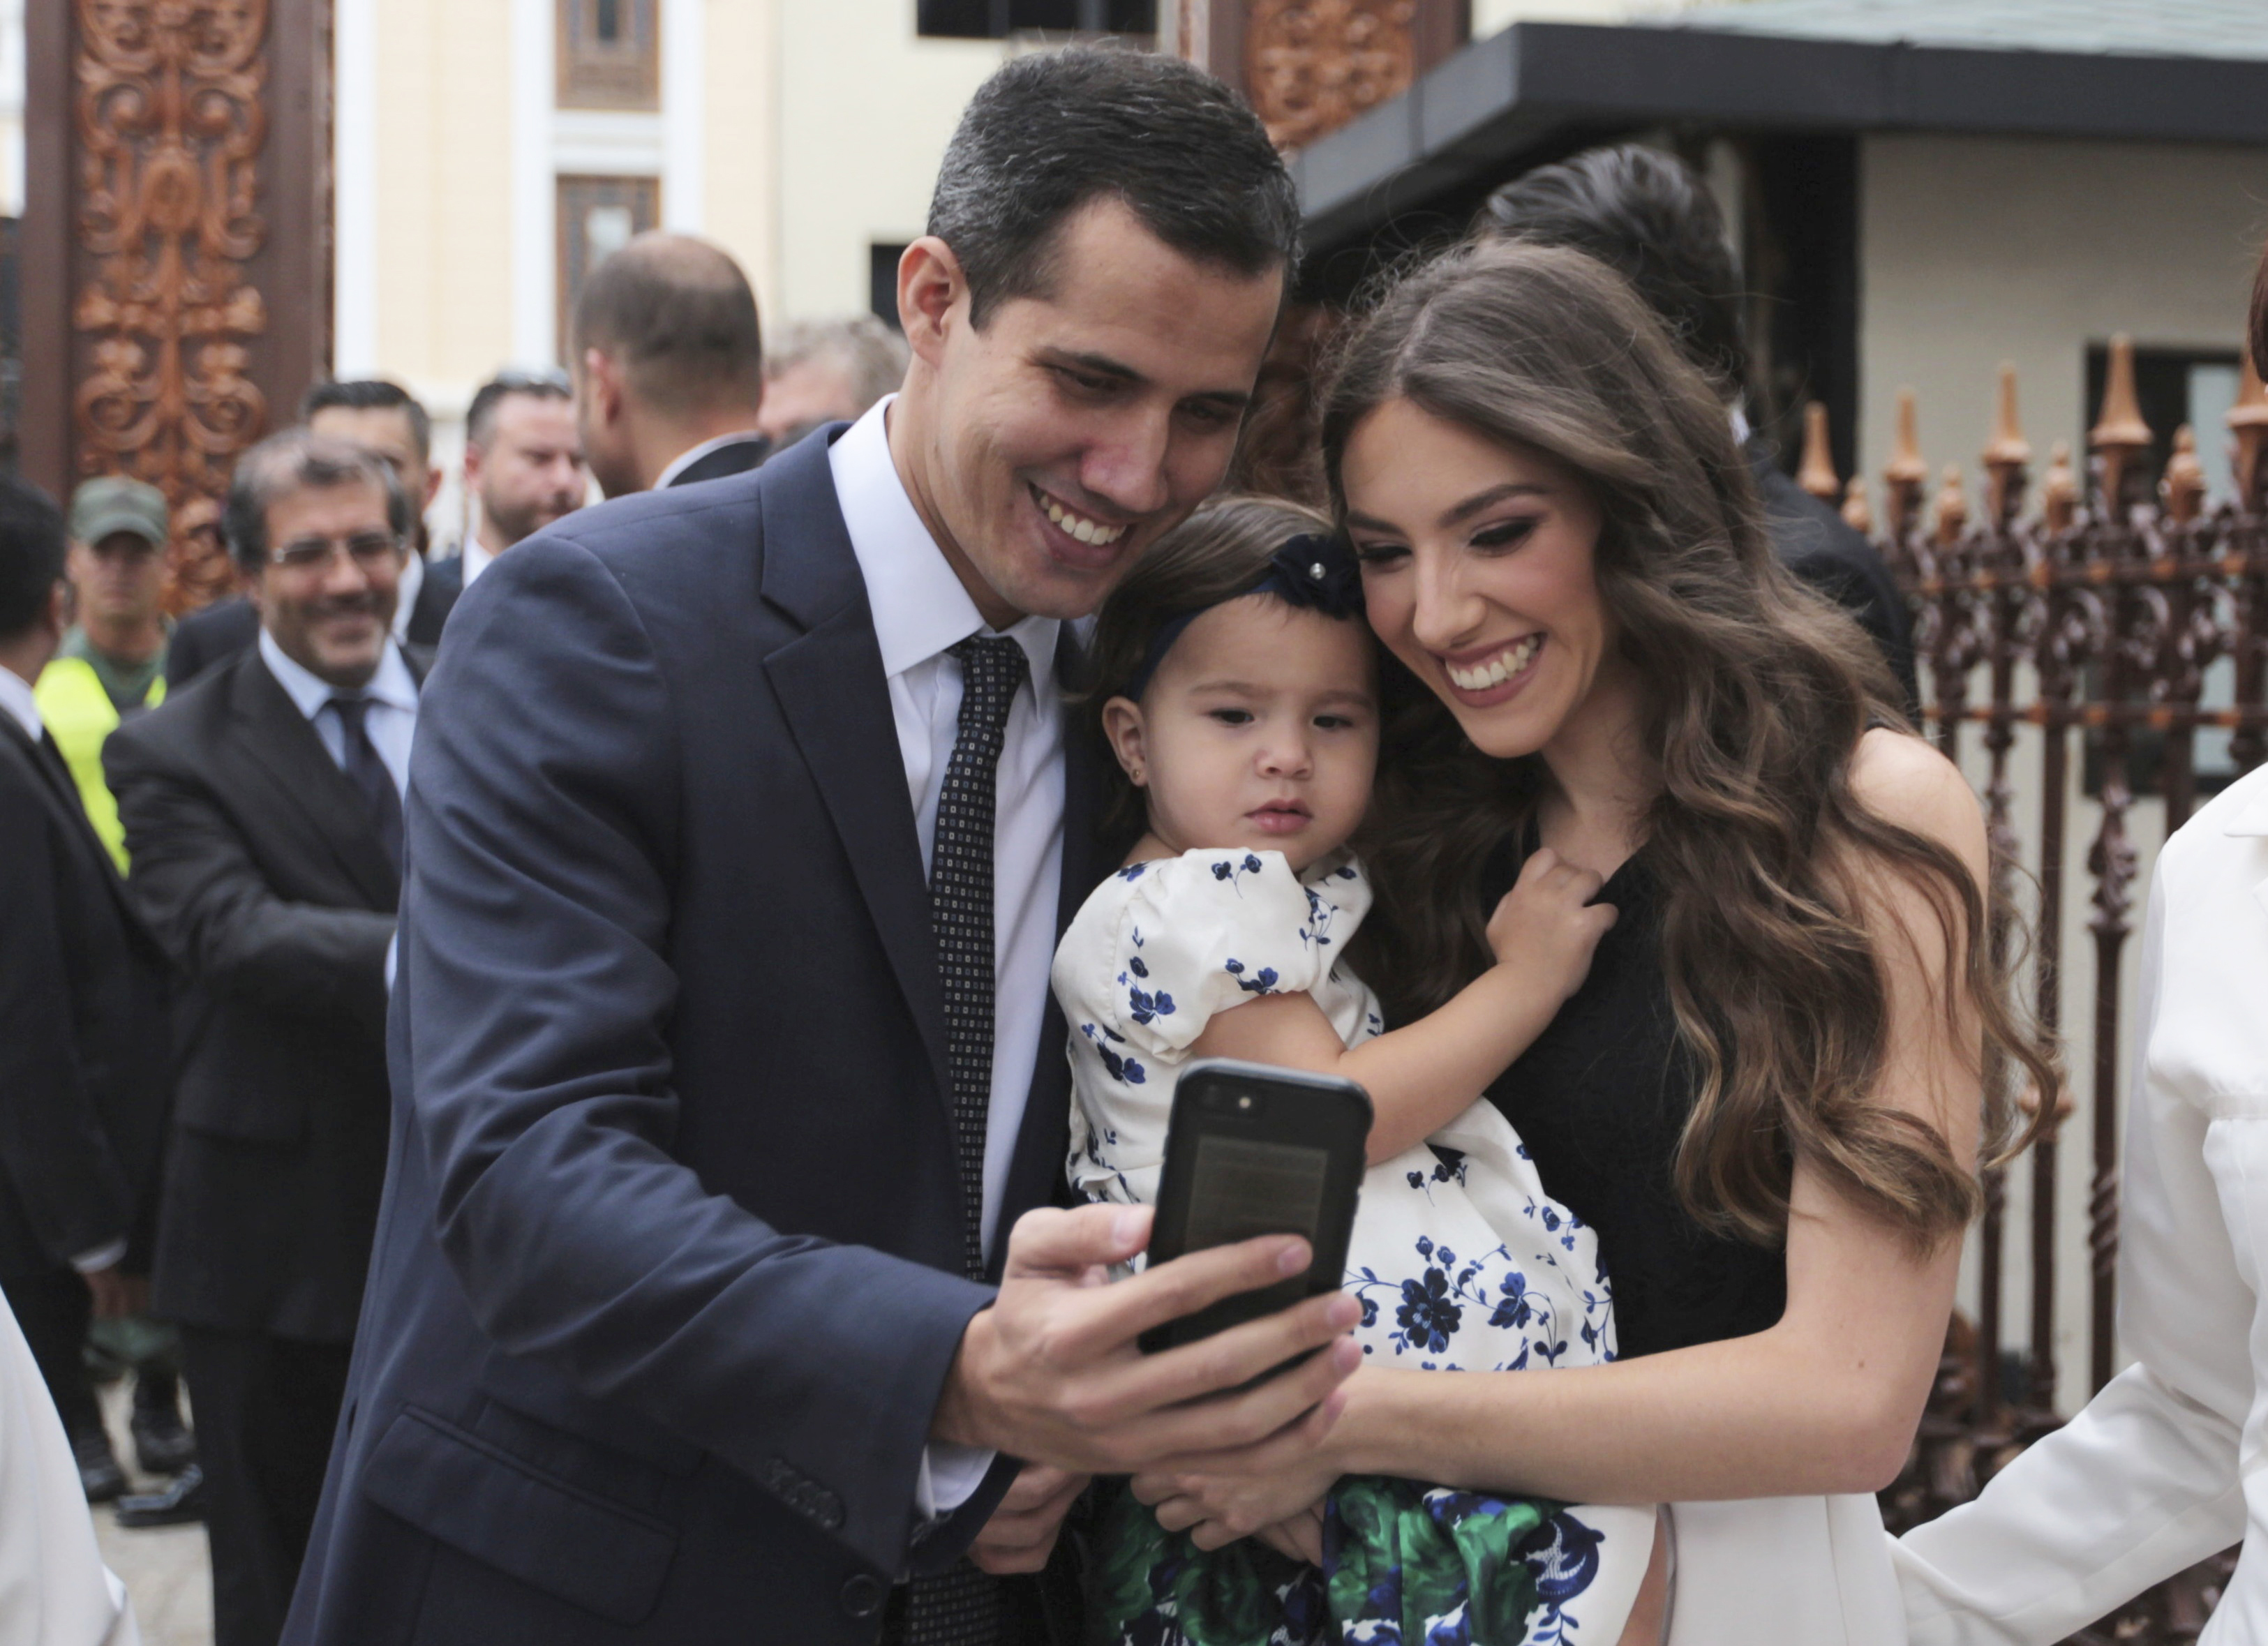 Juan Guaido takes a selfie with his wife Fabiana Rosales and his daughter Miranda